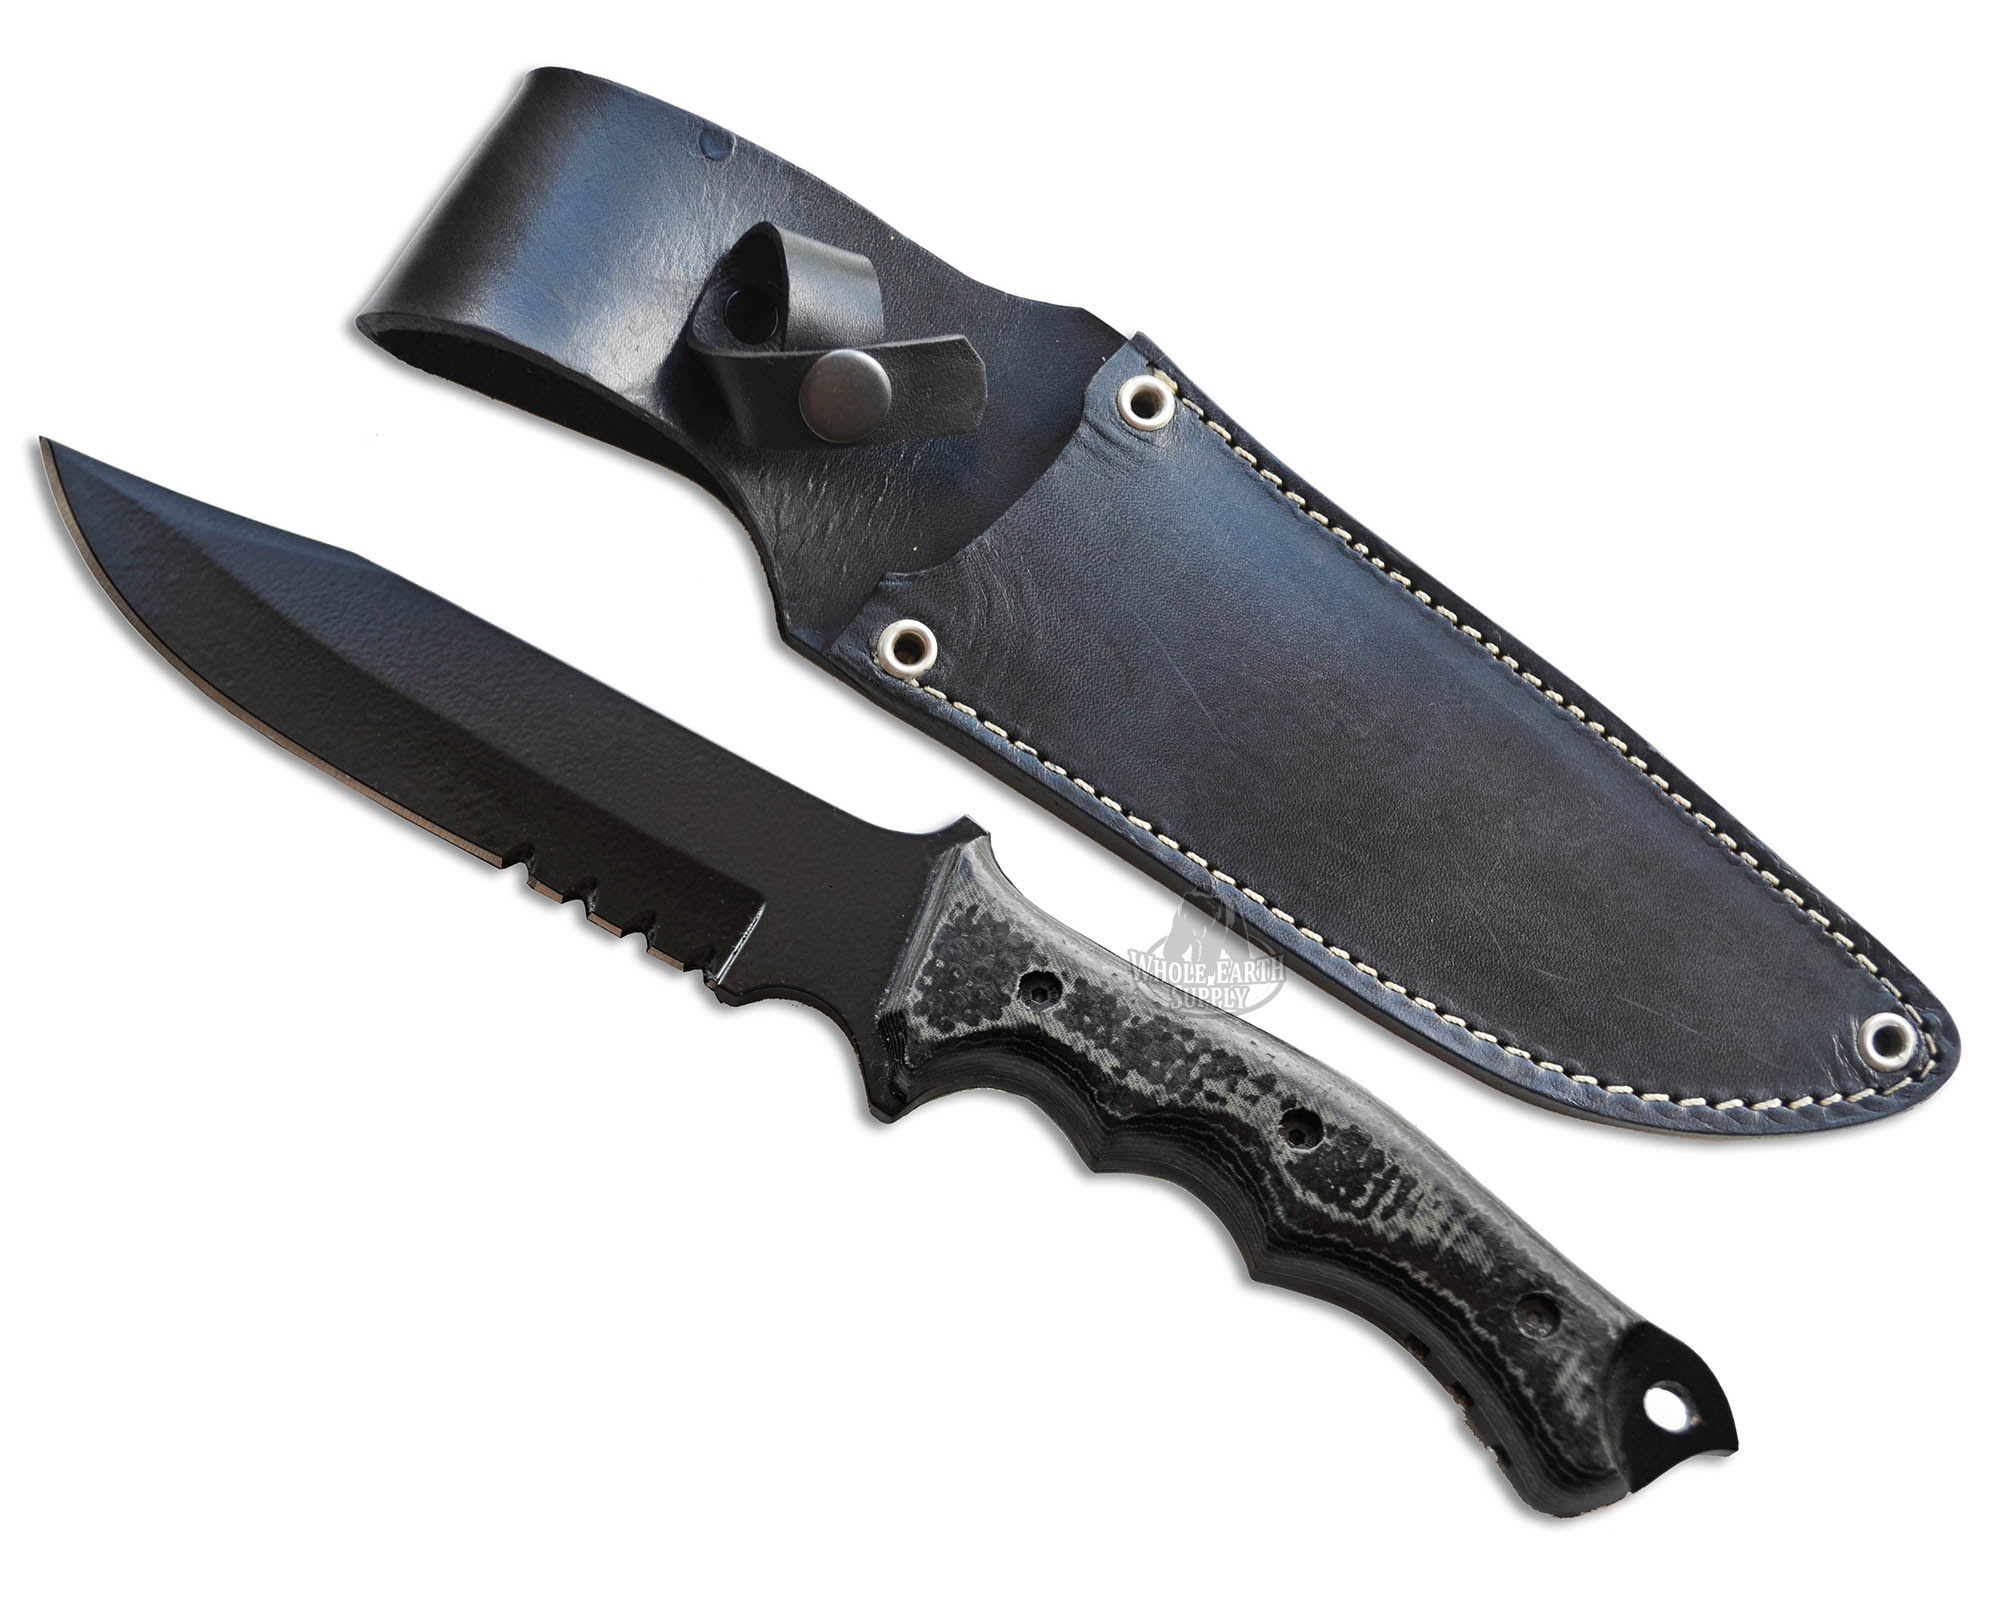 Large Black Bowie Hunting Knife 1095 Serrated with Black & Gray Micarta Custom Knives with Leather Sheath